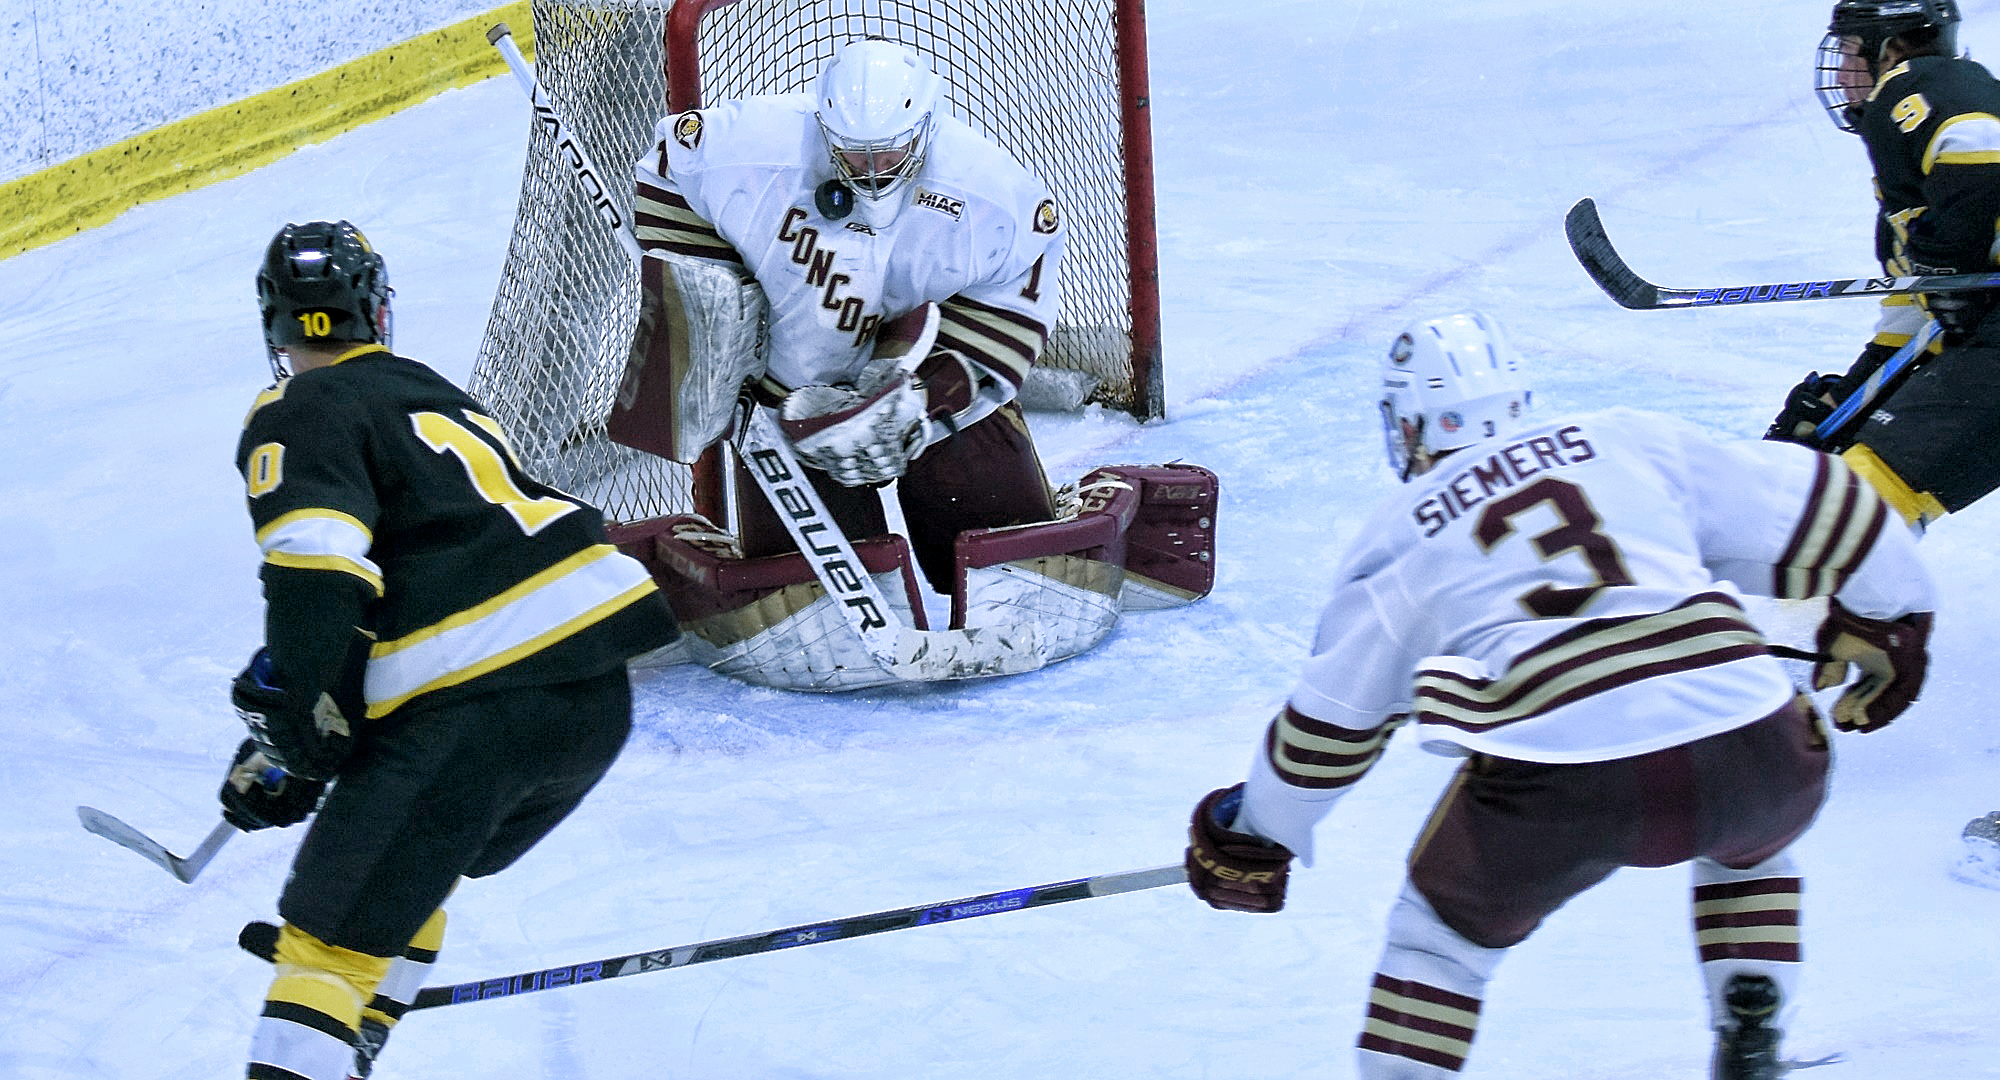 Junior goalie Jacob Stephan makes one of his 30 saves in the Cobbers' 1-0 victory over Gustavus.